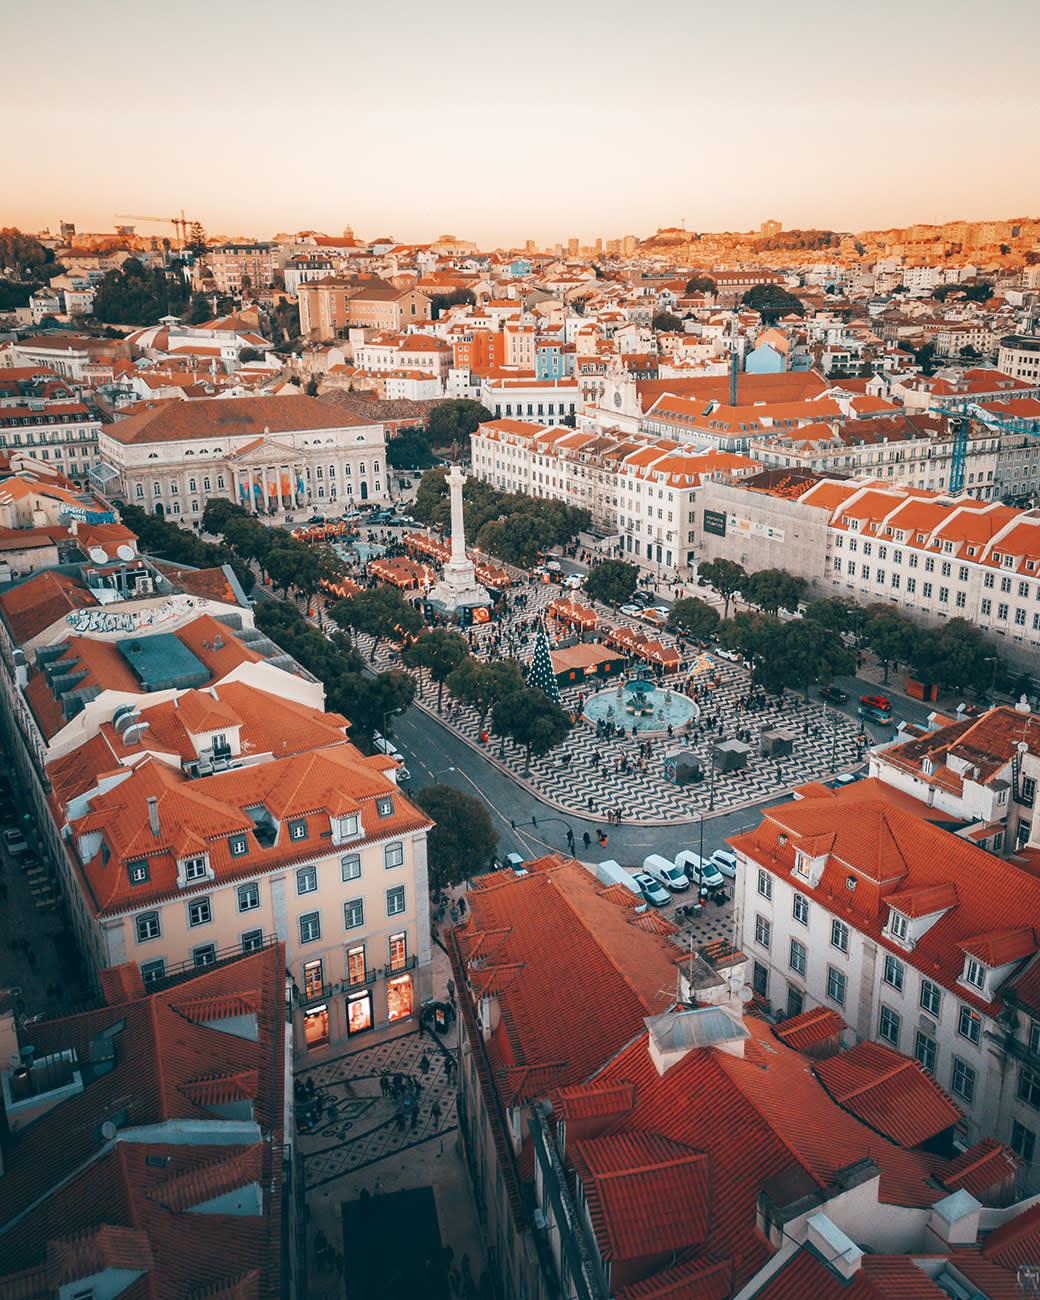 The rossio square from above